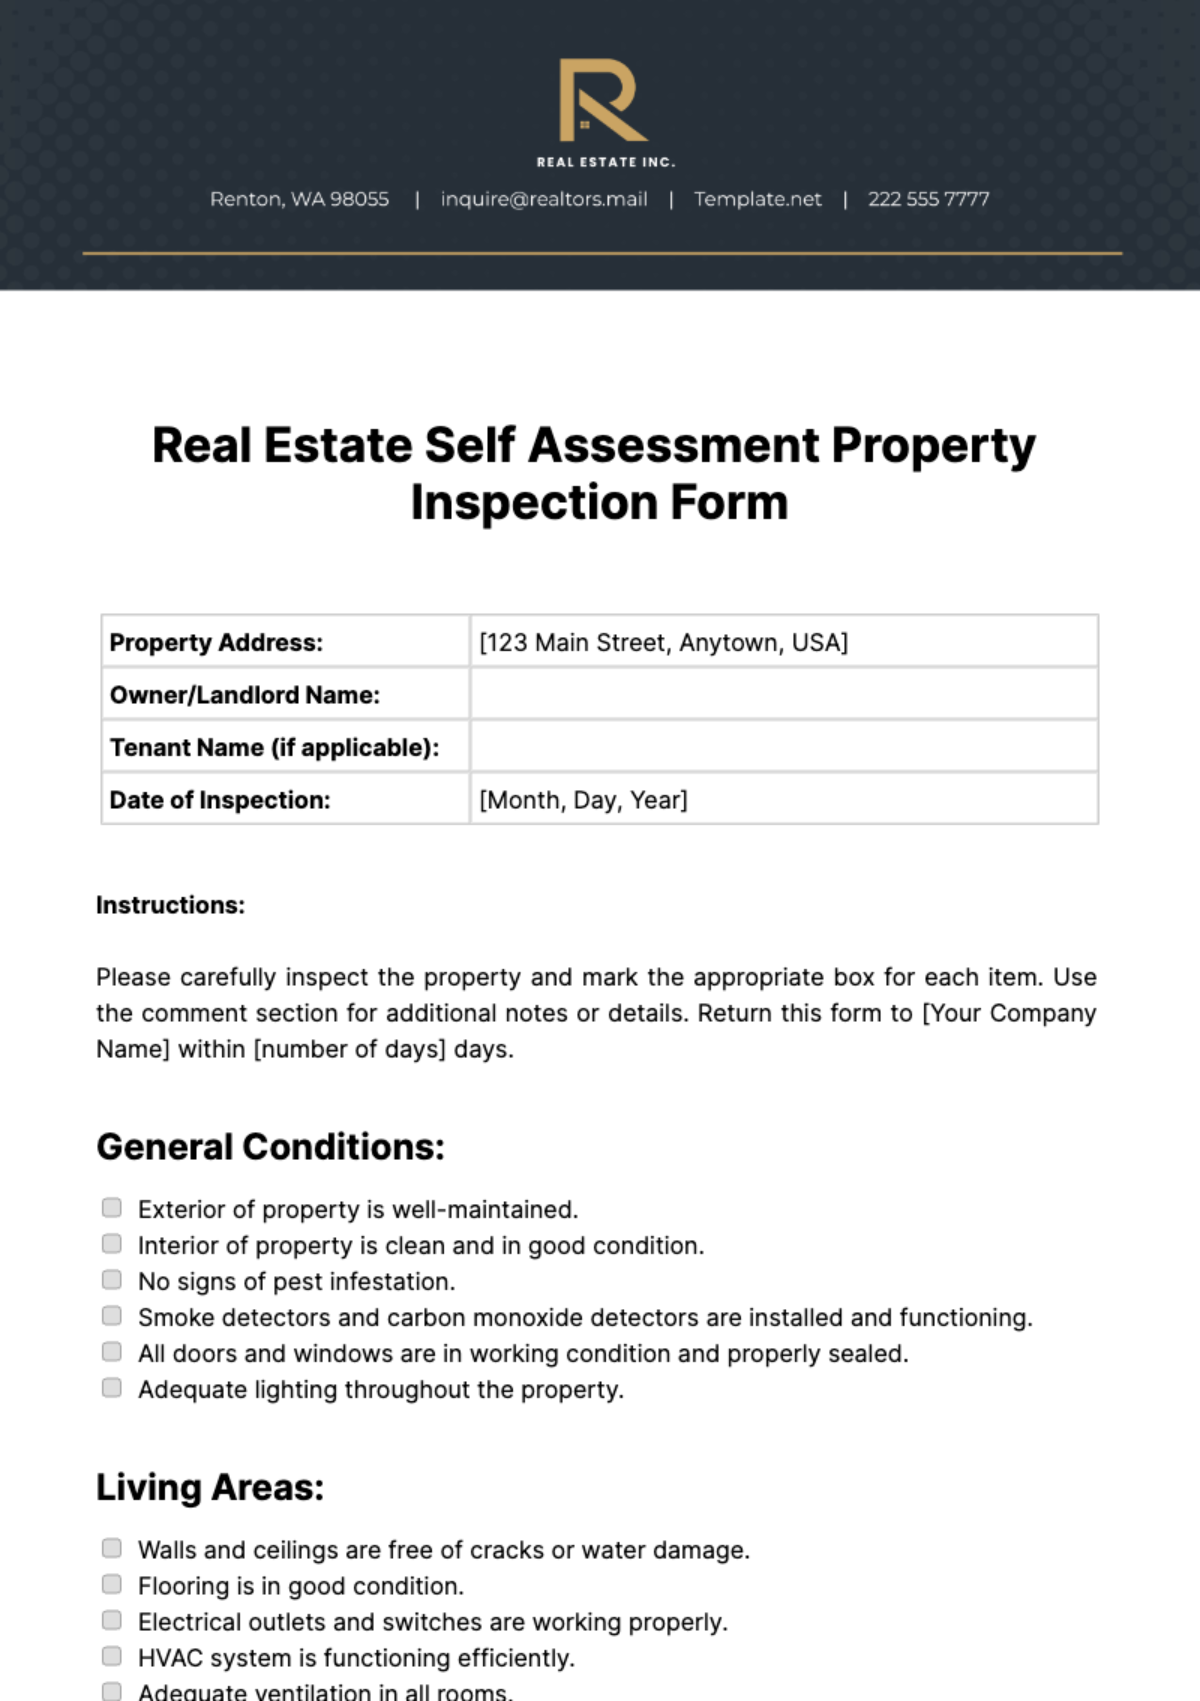 Real Estate Self Assessment Property Inspection Form Template